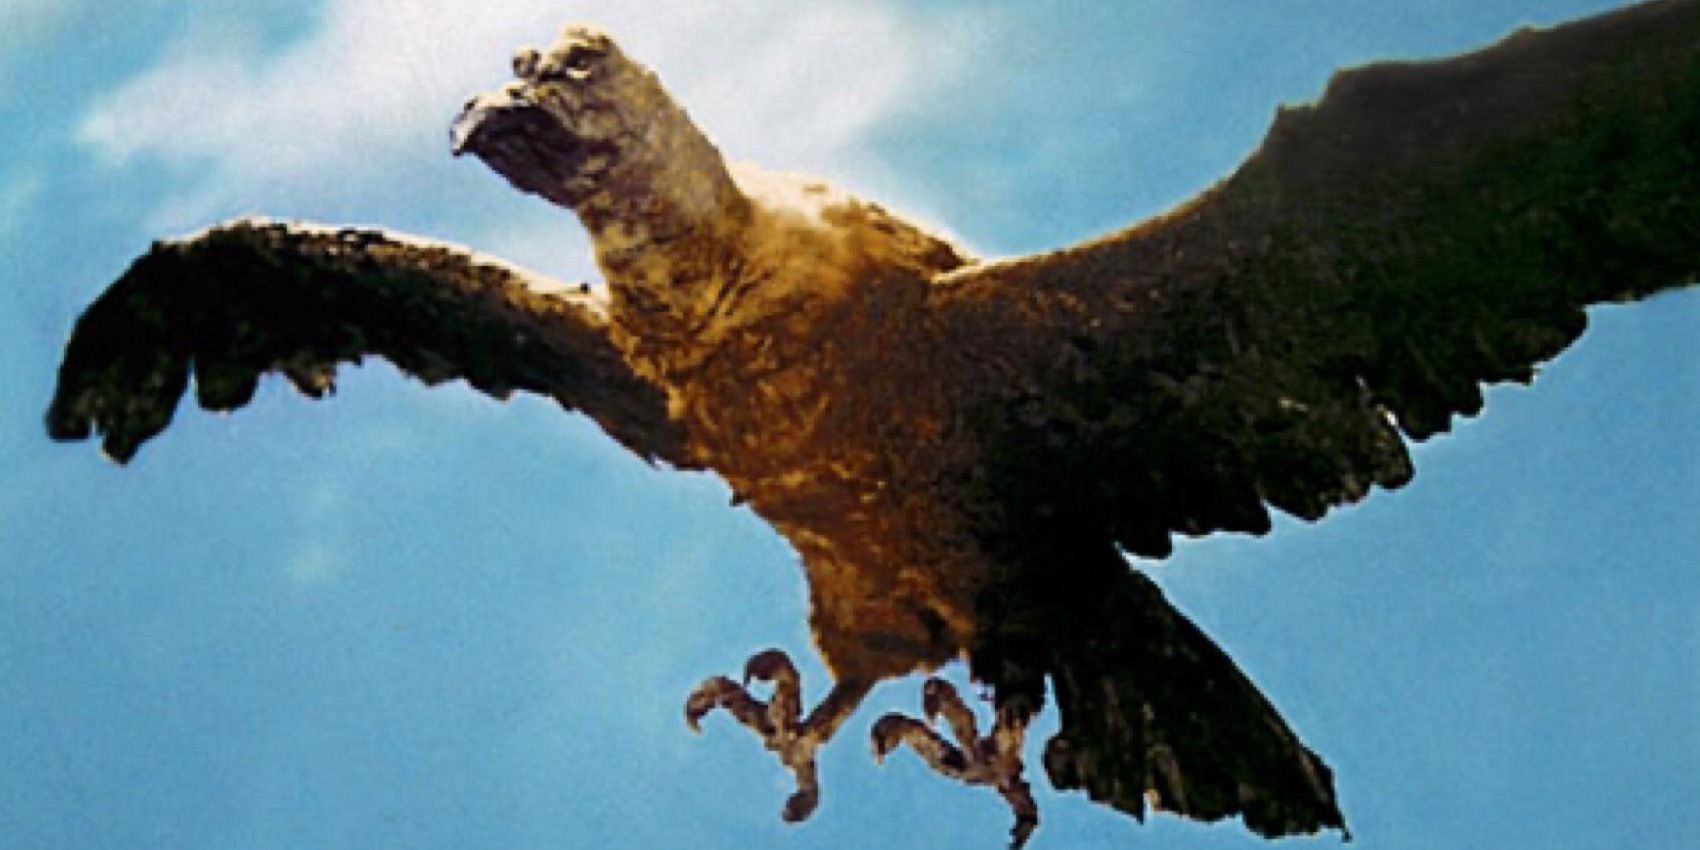 The Giant Condor flying in the 1966 Godzilla film, Ebirah, Horror of the Deep